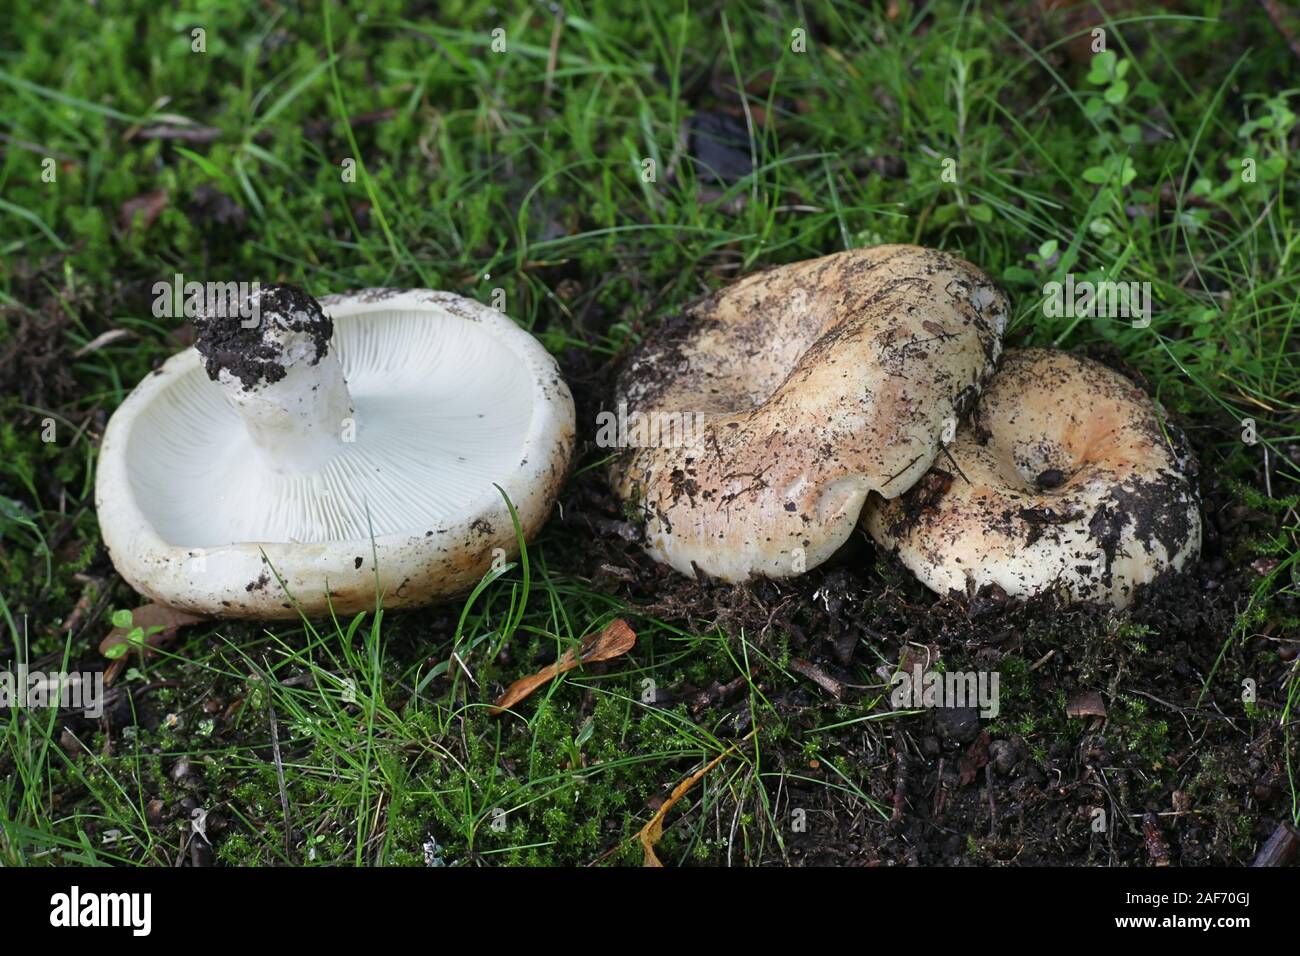 Russula chloroides, known as Blue Band Brittlegill, wild mushroom from Finland Stock Photo